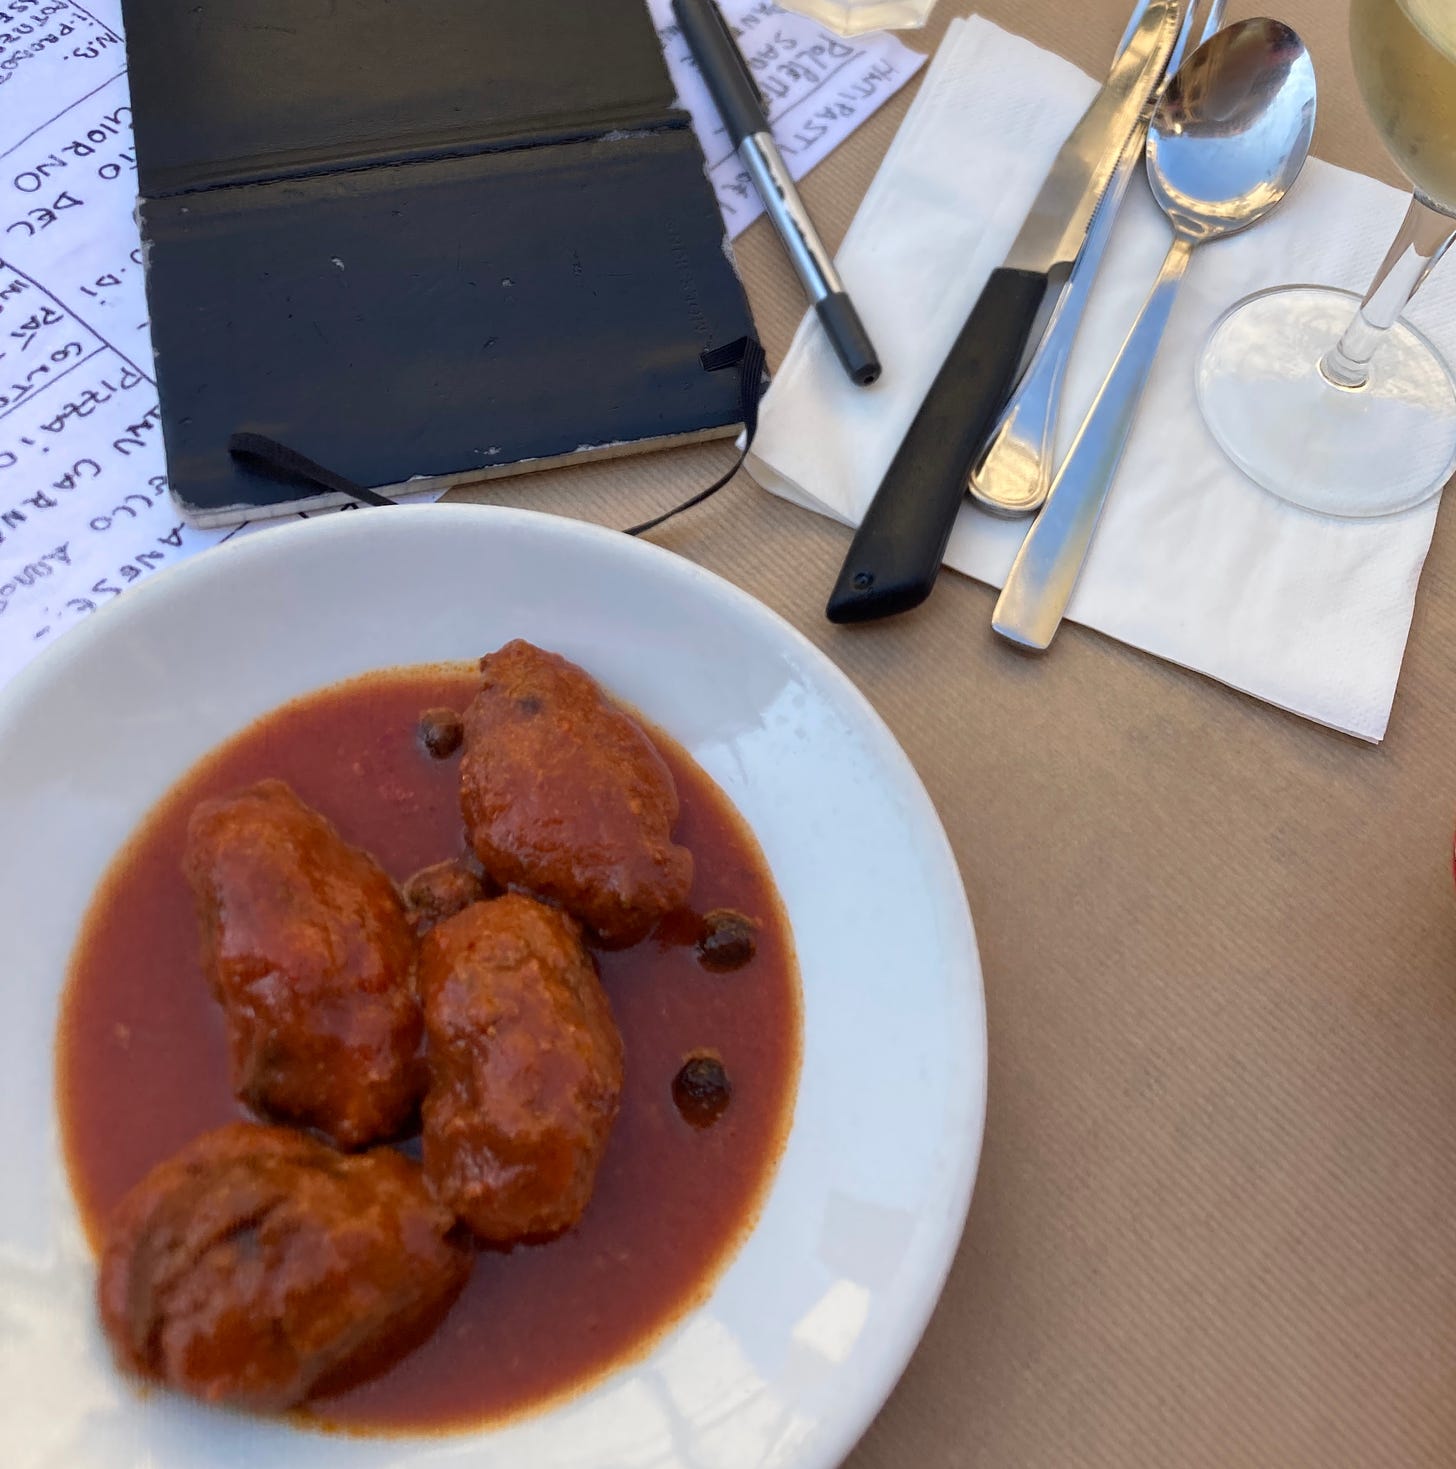 A notebook, a glass of wine, a plate of sardine balls in tomato sauce